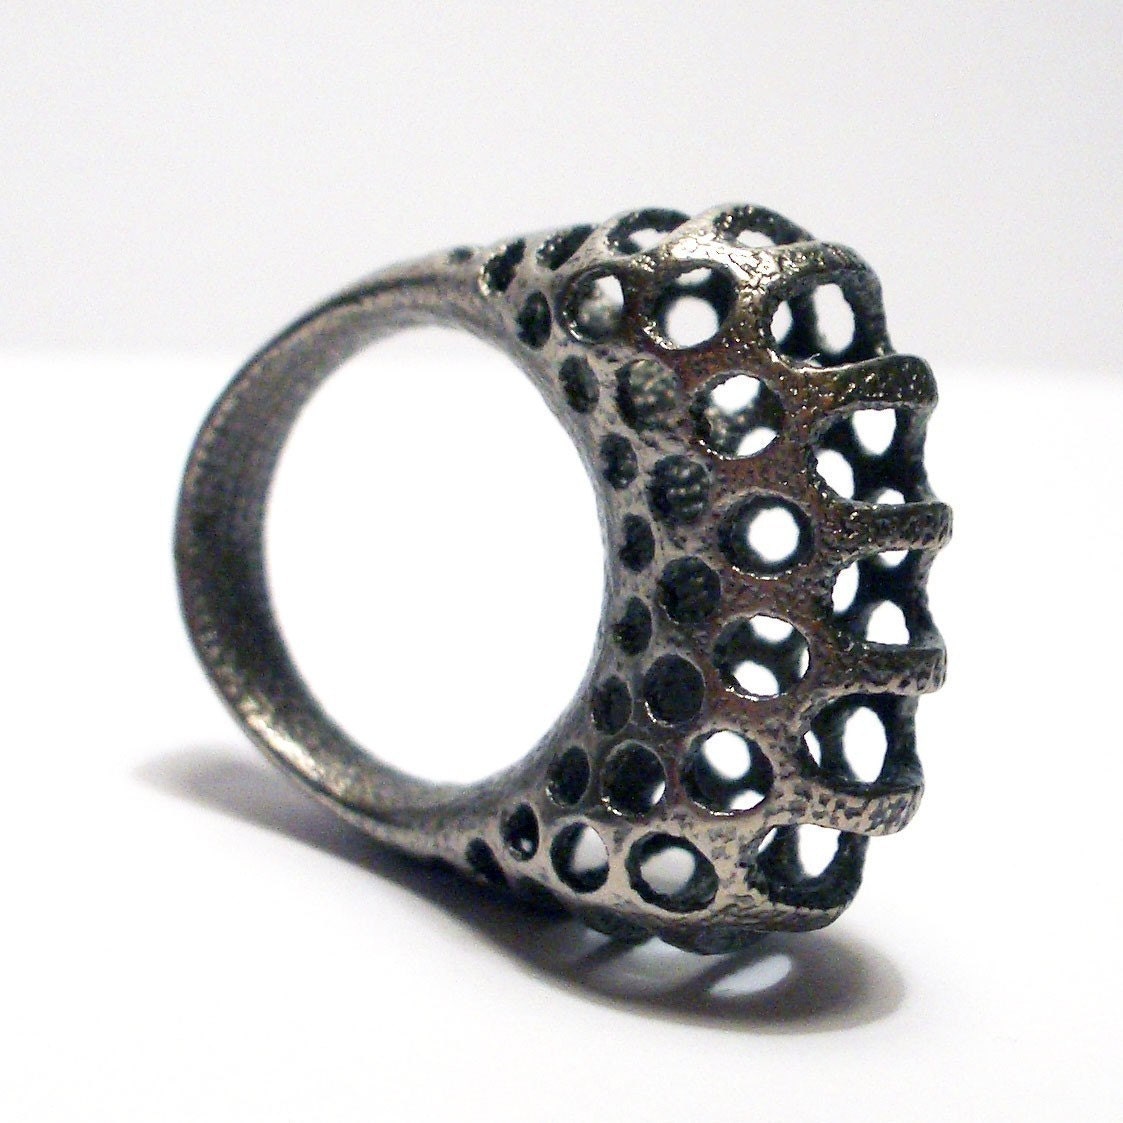 Polyoptic Ring 4.2 in Stainless Steel - 3D printed Free Shipping - uptomuch